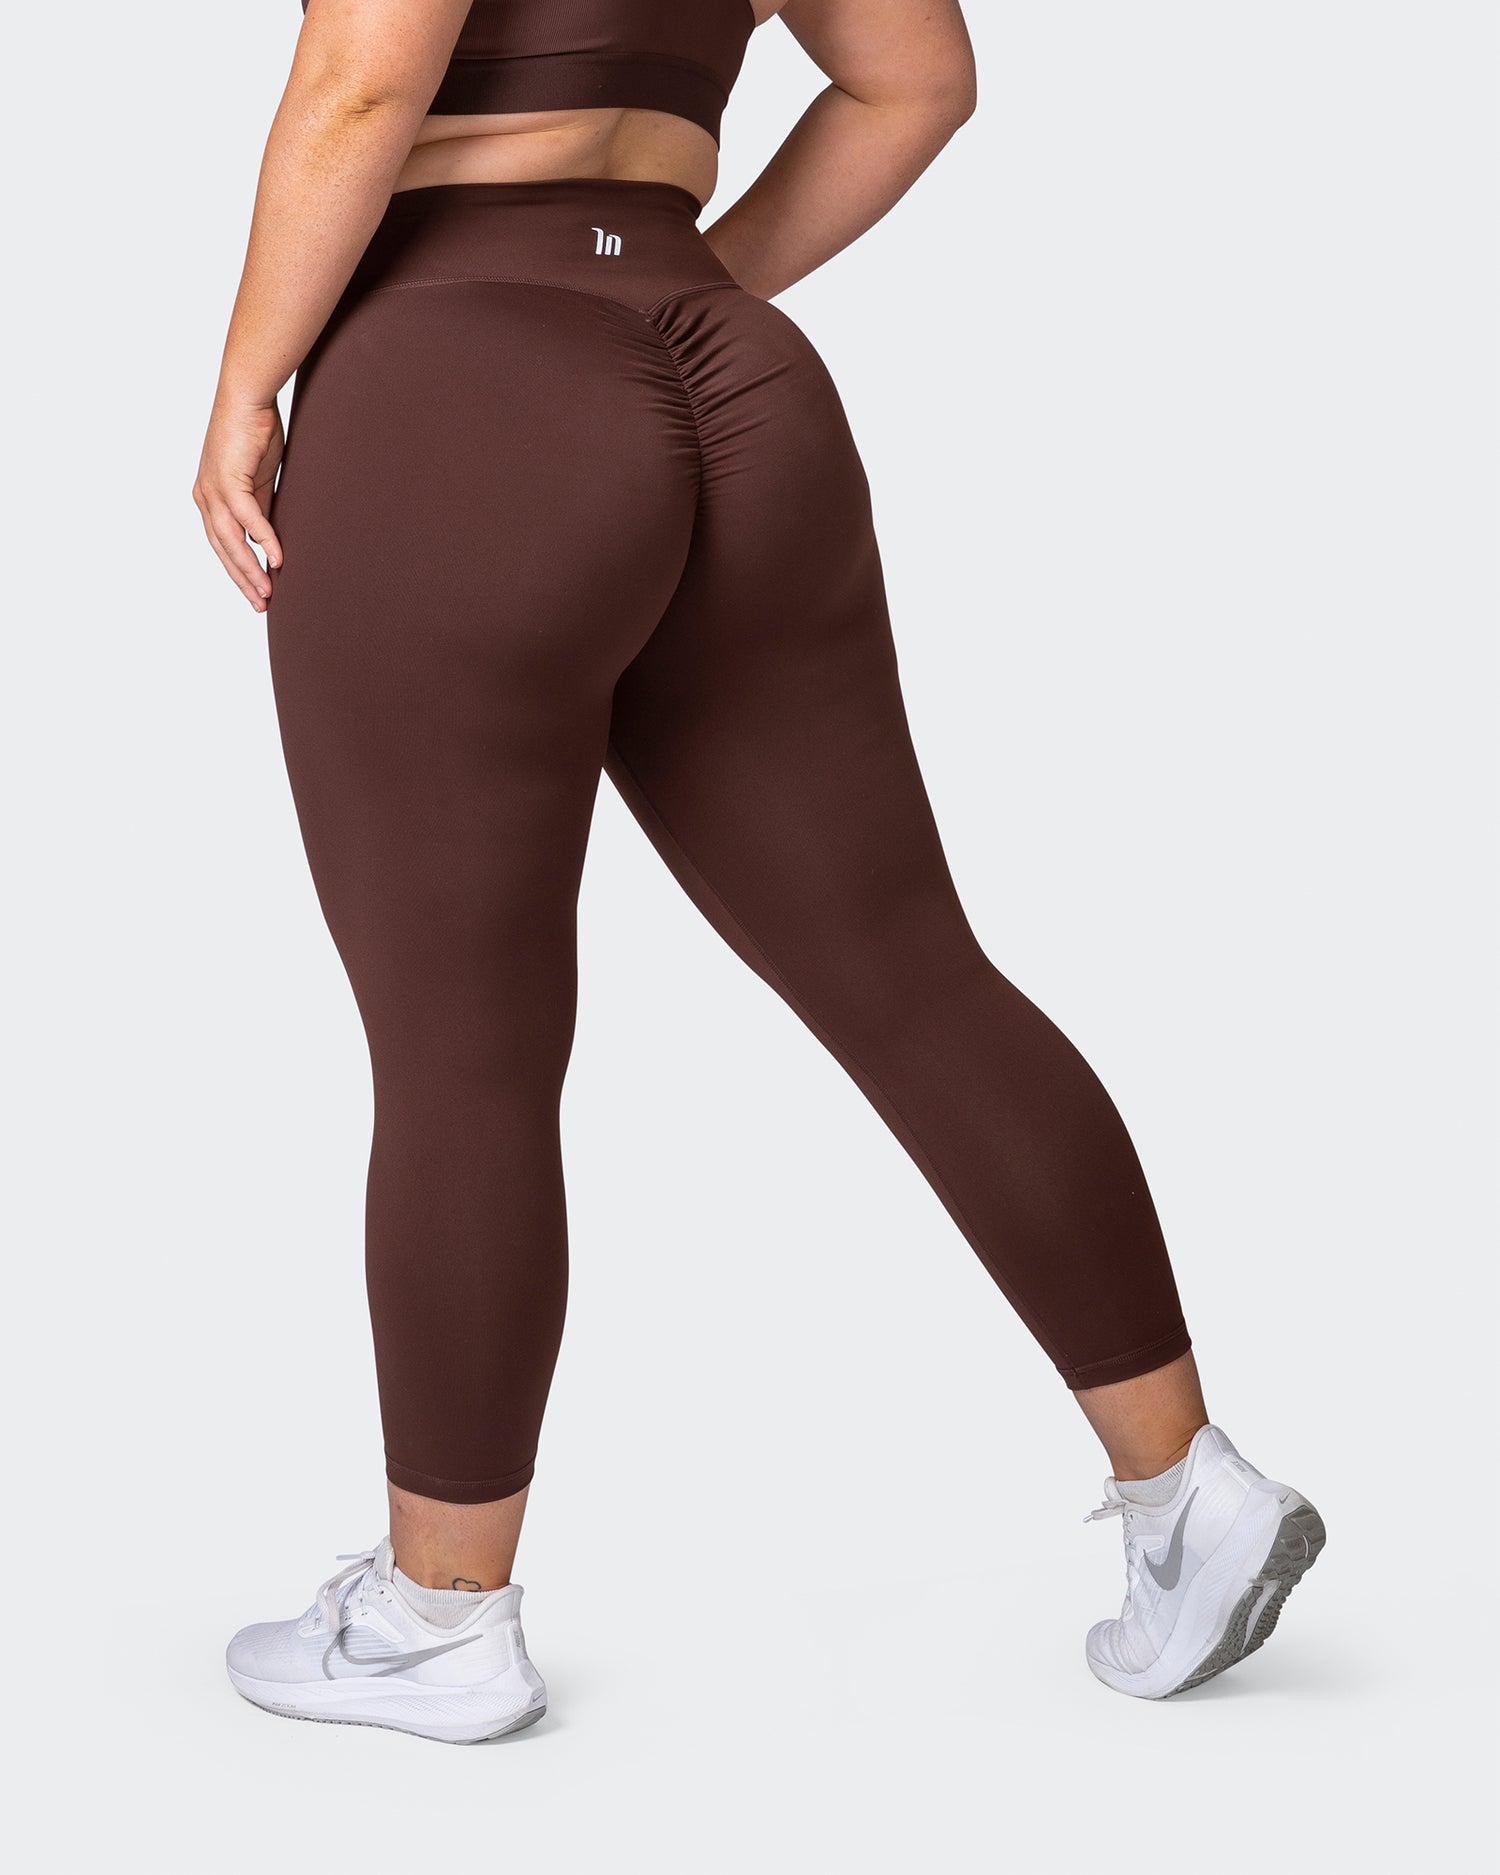 Signature Scrunch 7/8 Leggings - Paradise Pink - Muscle Nation